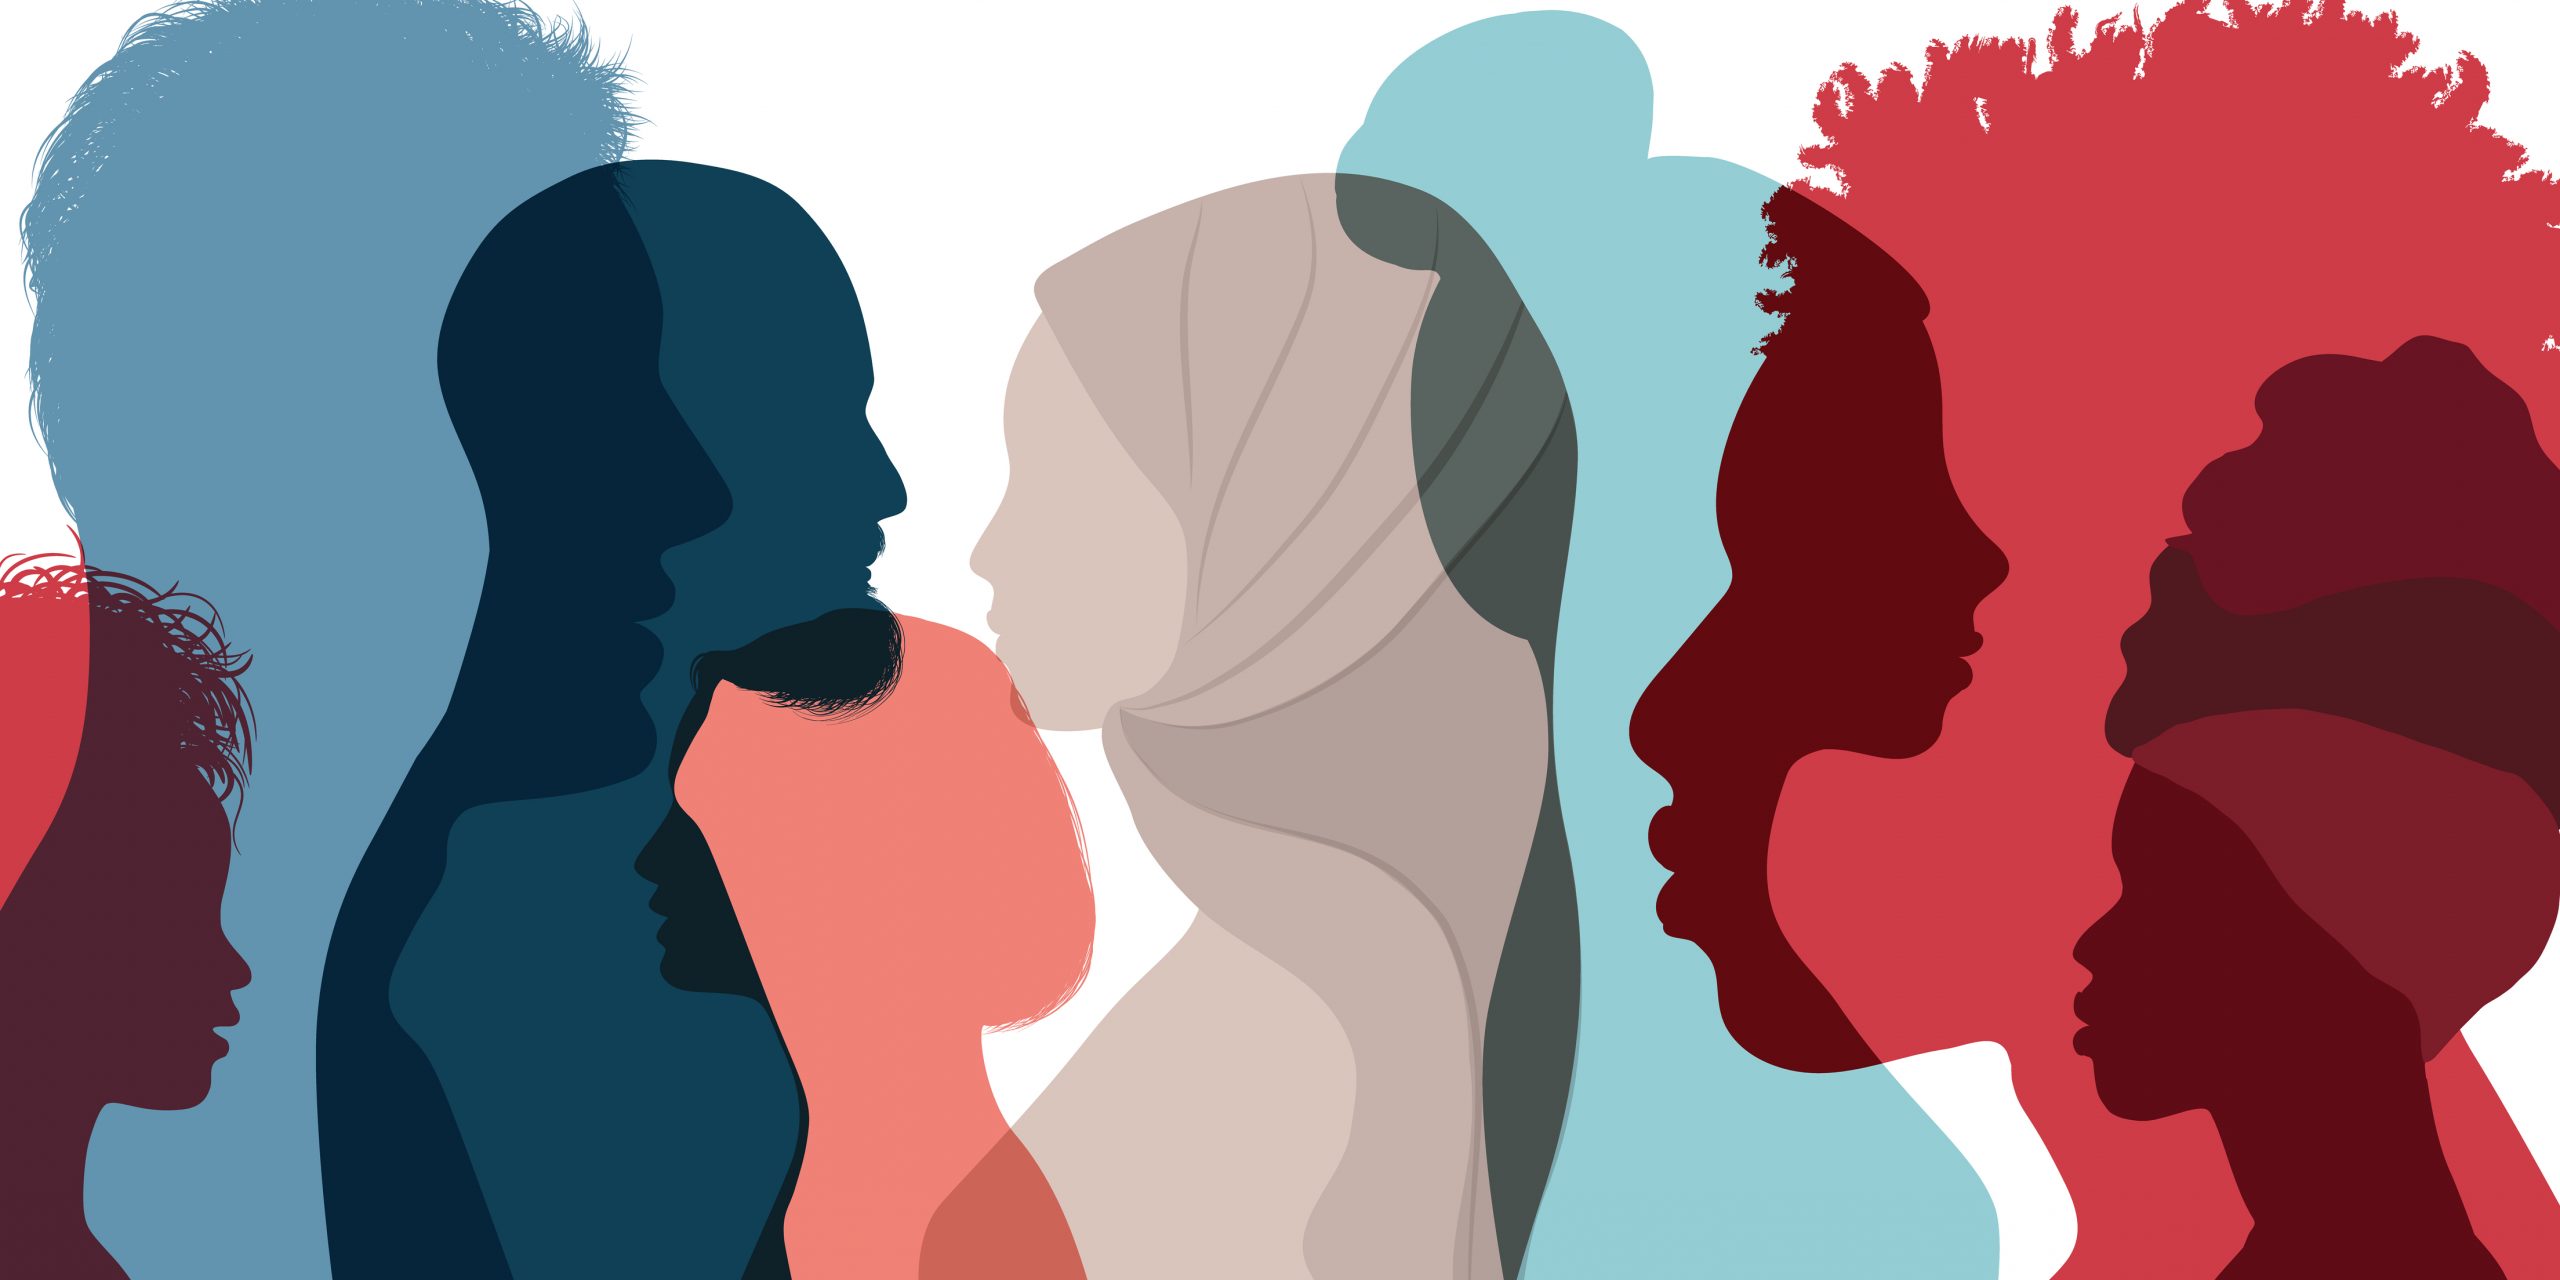 A silhouette profile group of men and women of diverse cultures